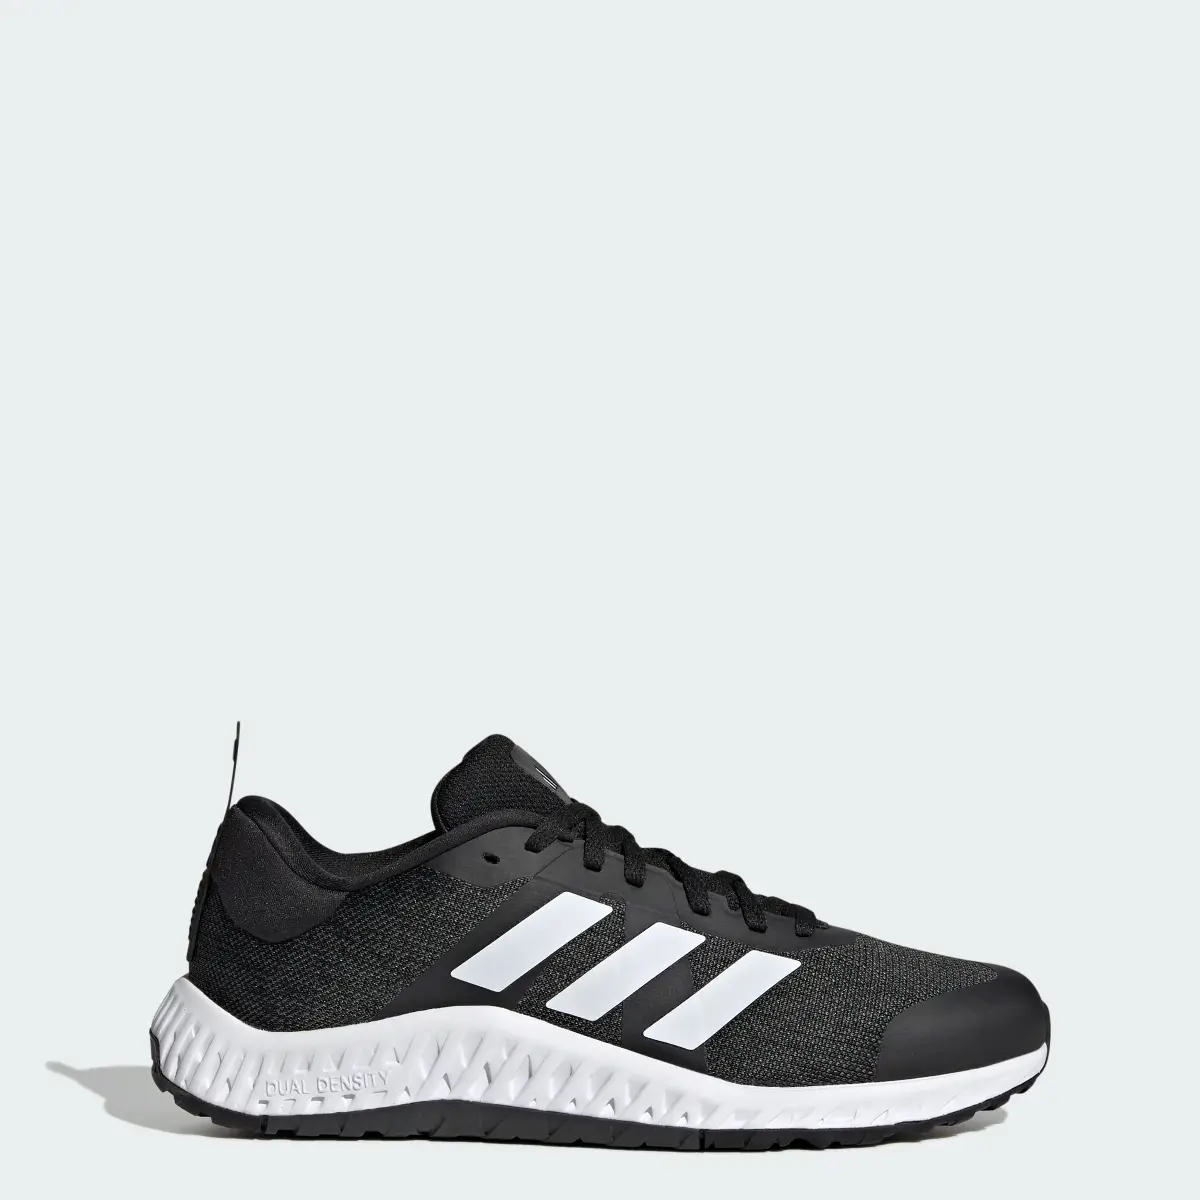 Adidas Everyset Trainer Shoes. 1